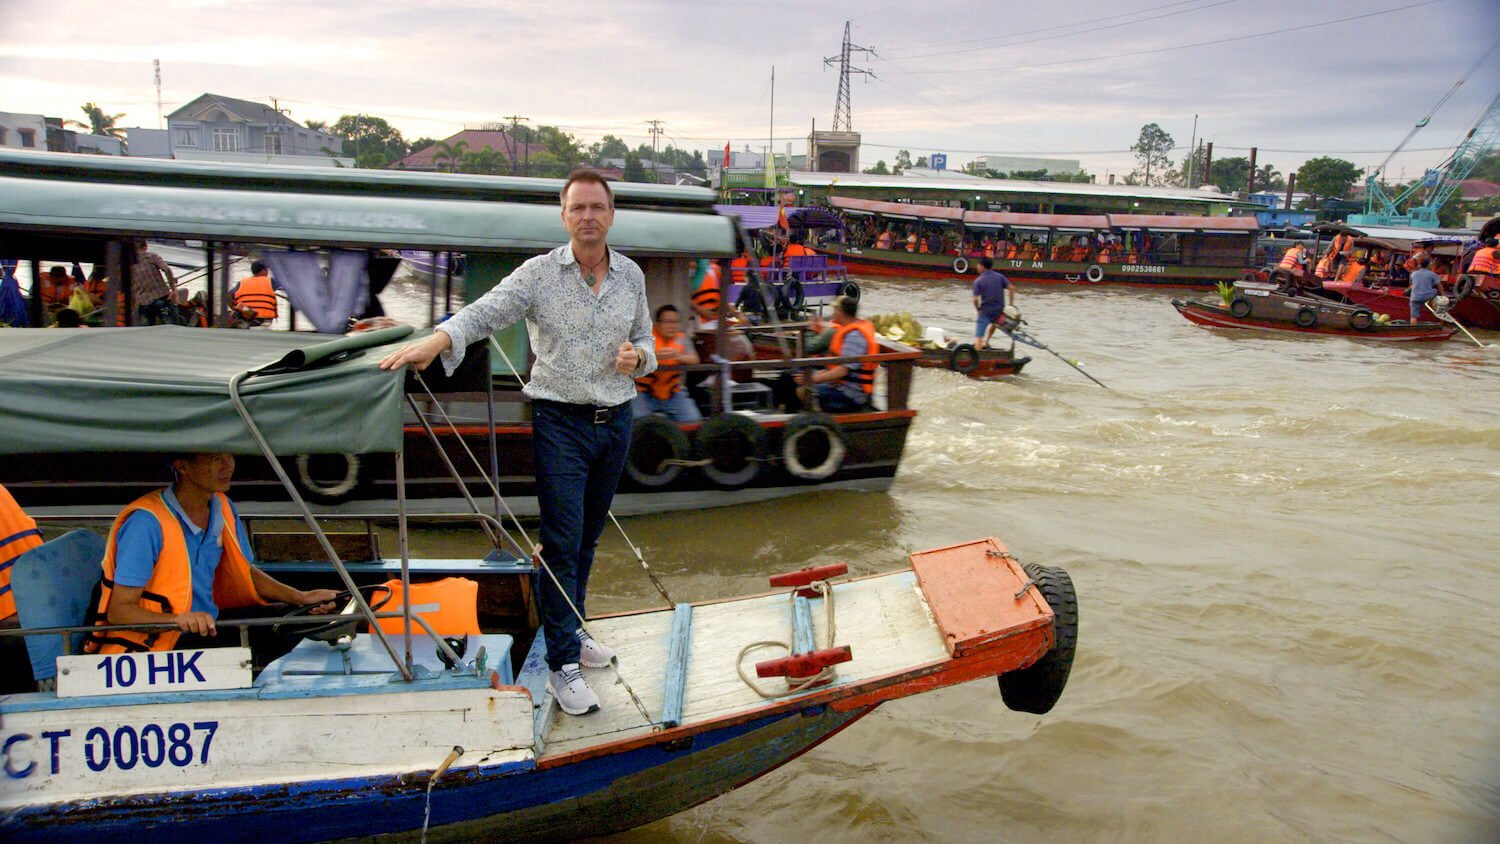 Phil Keoghan standing on a boat in 'The Amazing Race' Season 35